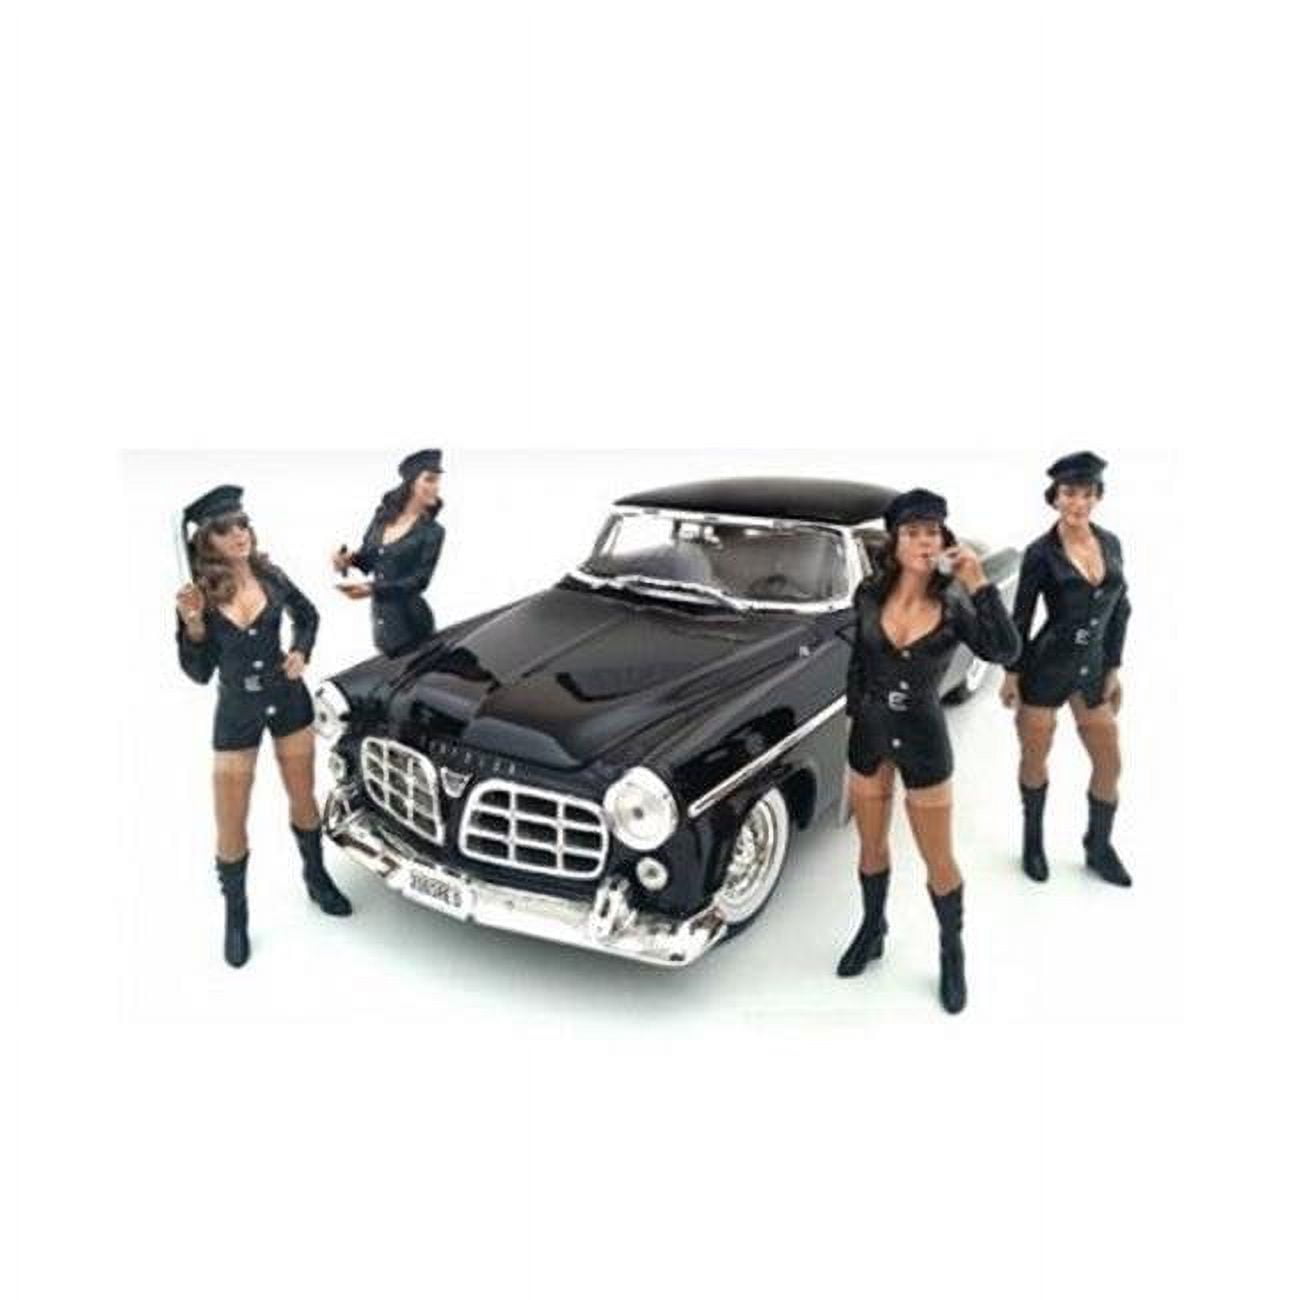 Costume Babes Figure Set For 1-18 Scale Models, 4 Piece